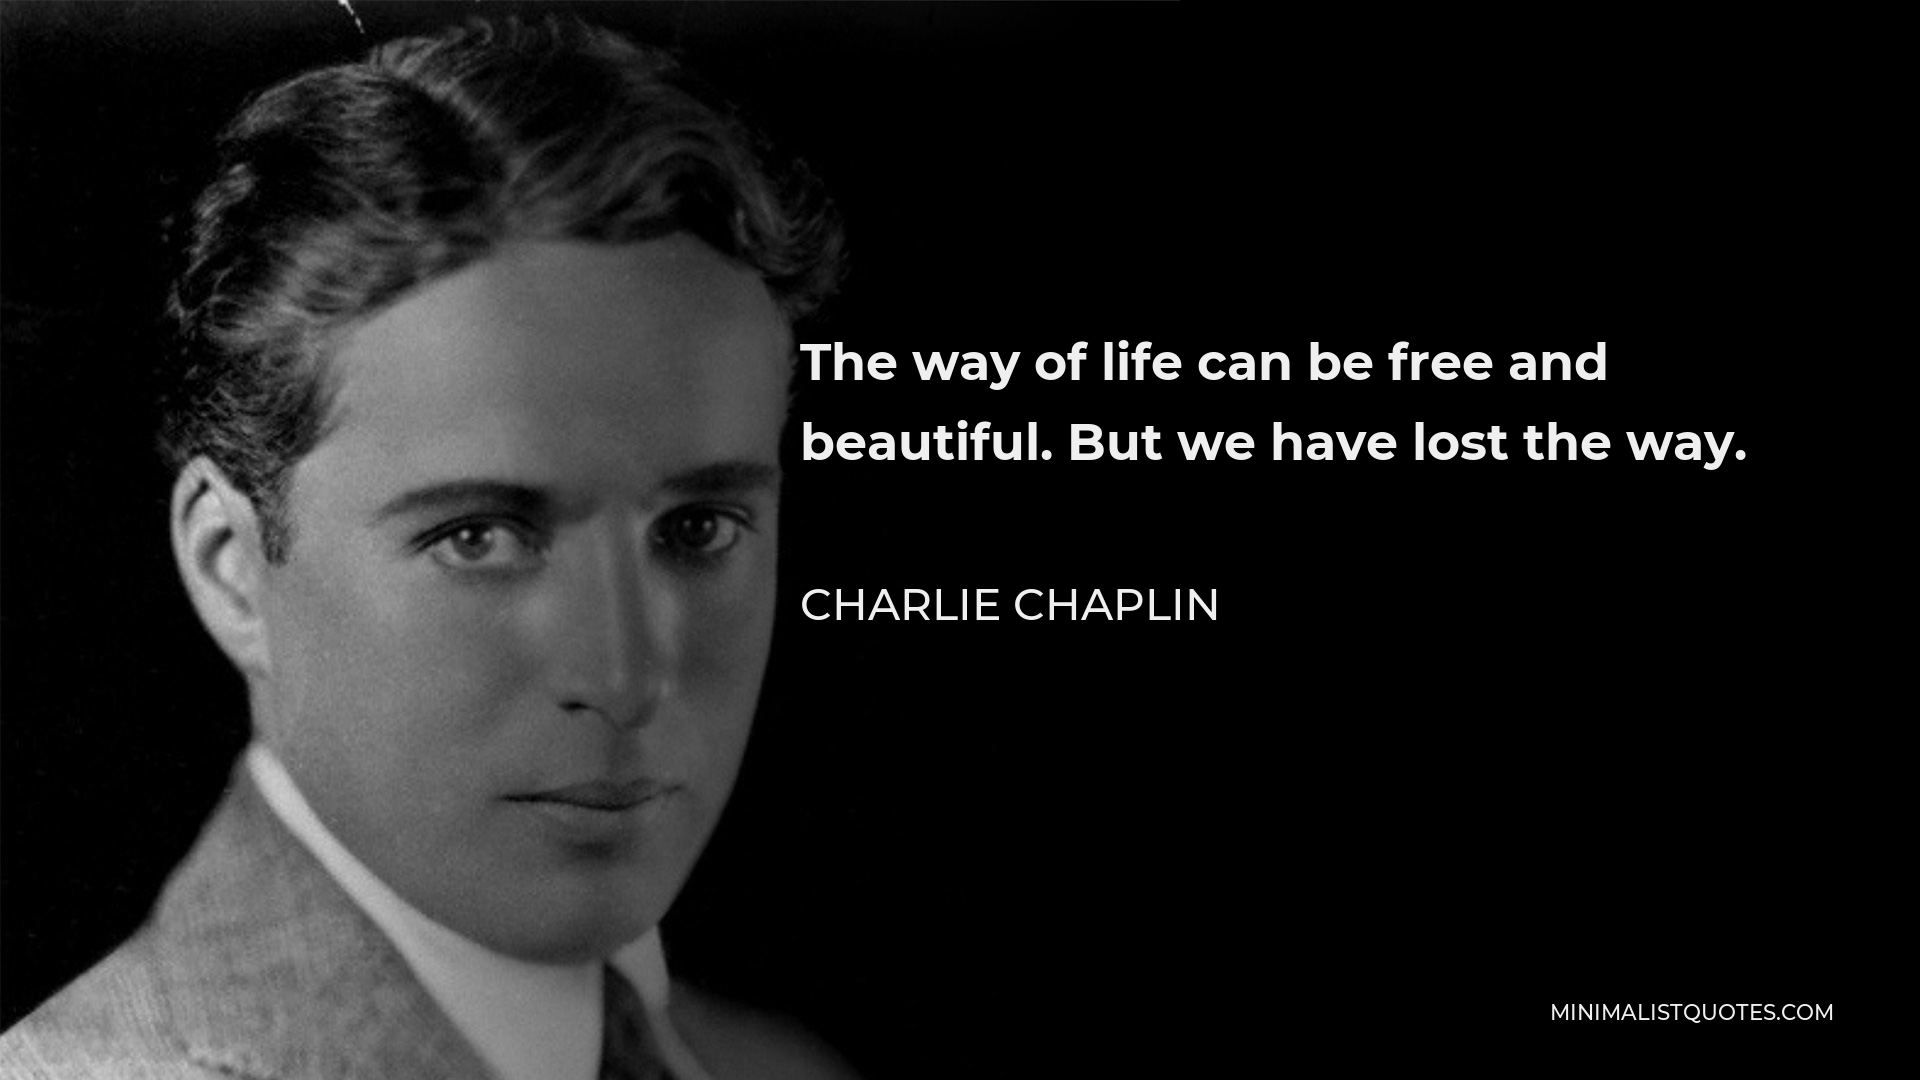 Charlie Chaplin Quote - The way of life can be free and beautiful. But we have lost the way.